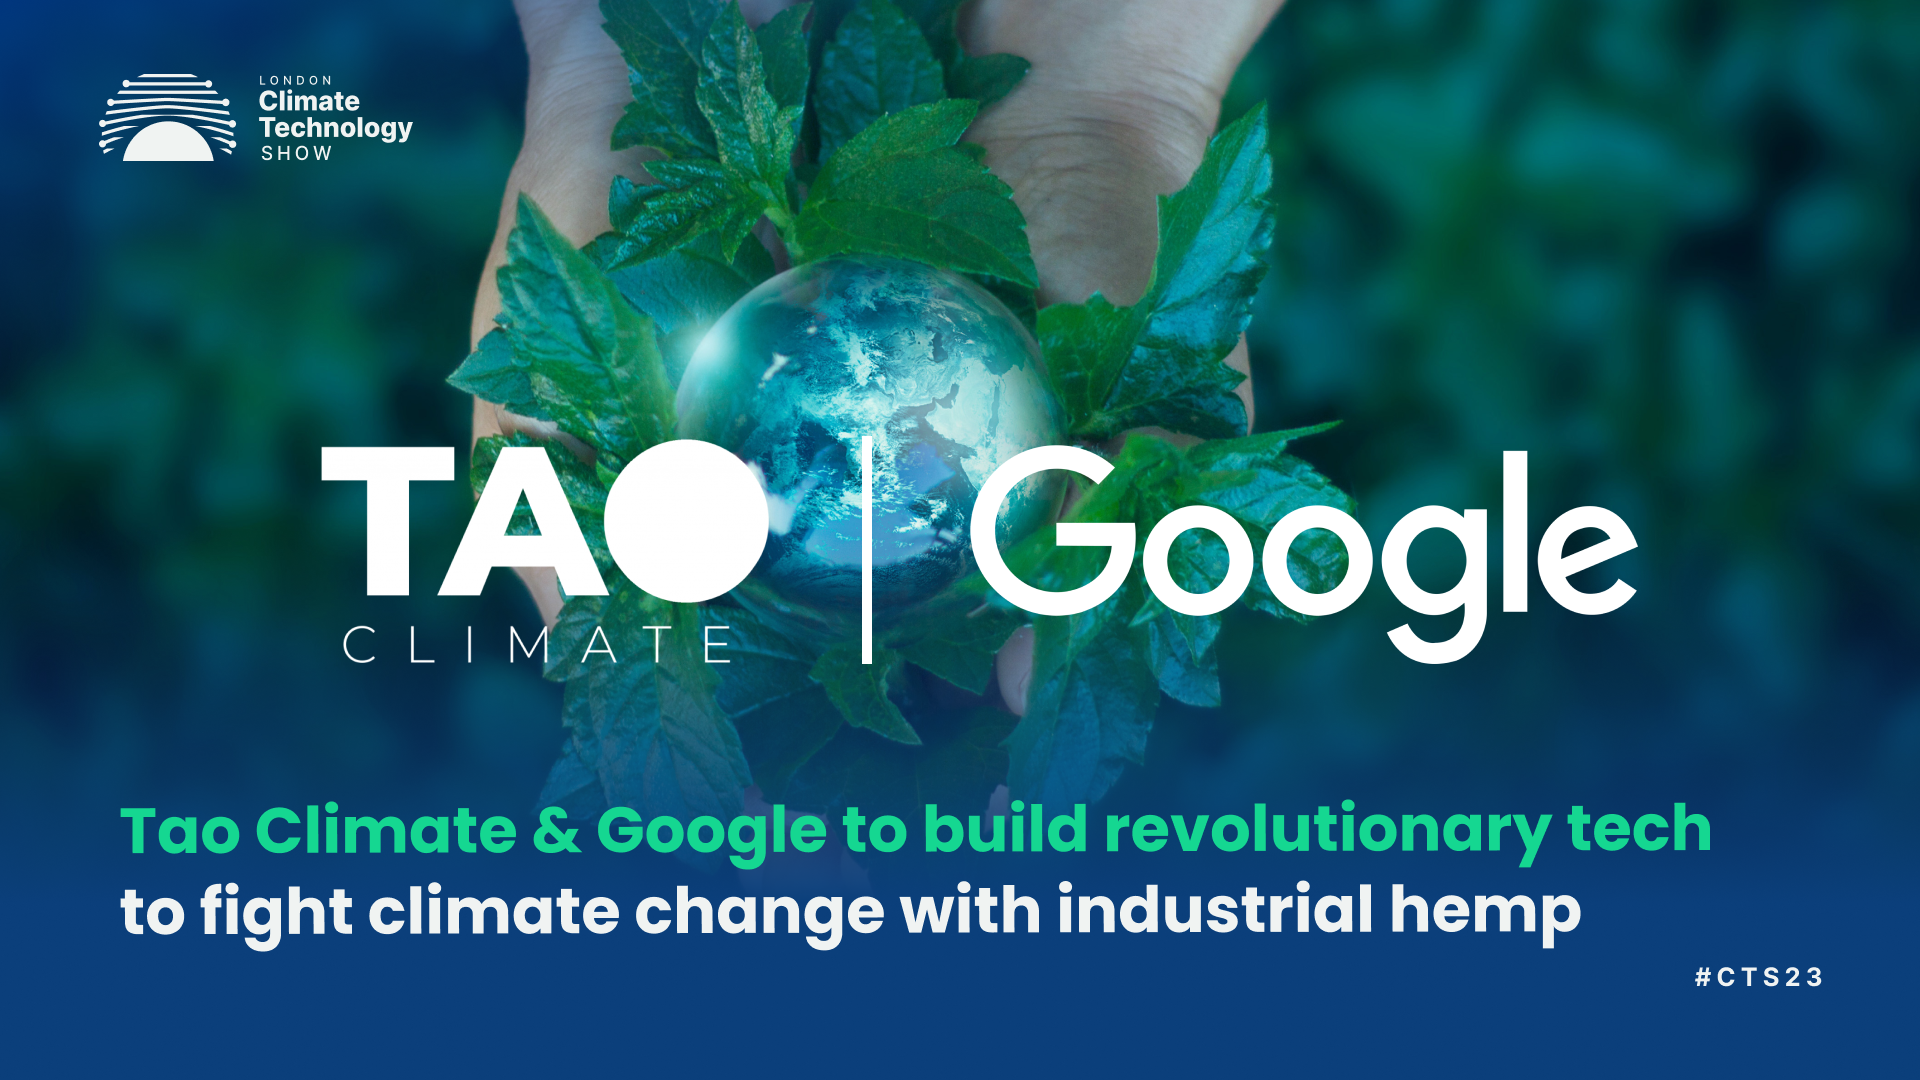 Tao Climate & Google To Foster Sustainability With Industrial Hemp